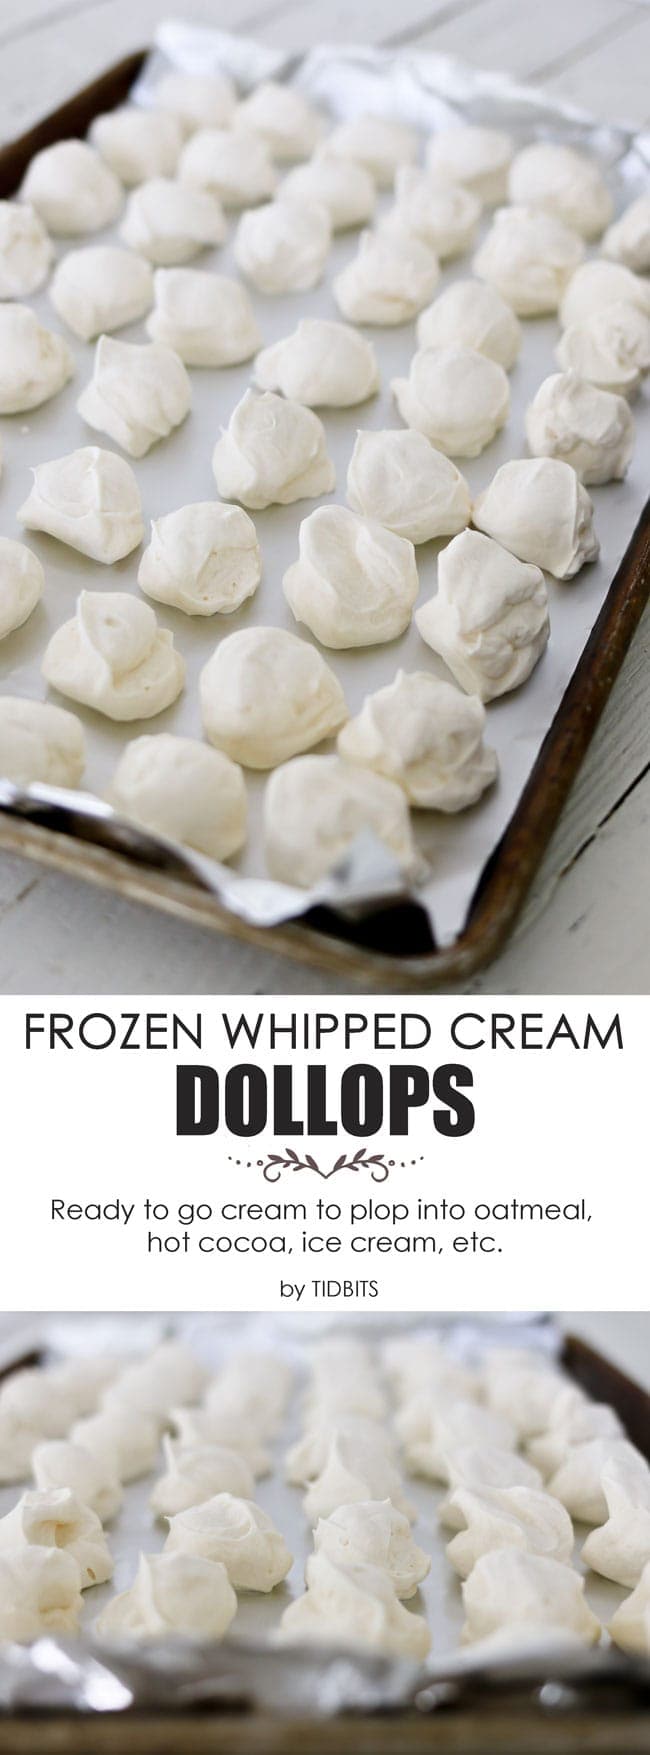 Frozen Whipped Cream Dollops. Perfect to toss into your favorite oatmeal, hot drinks, or top your favorite treats. Creamy and yummy convenience.